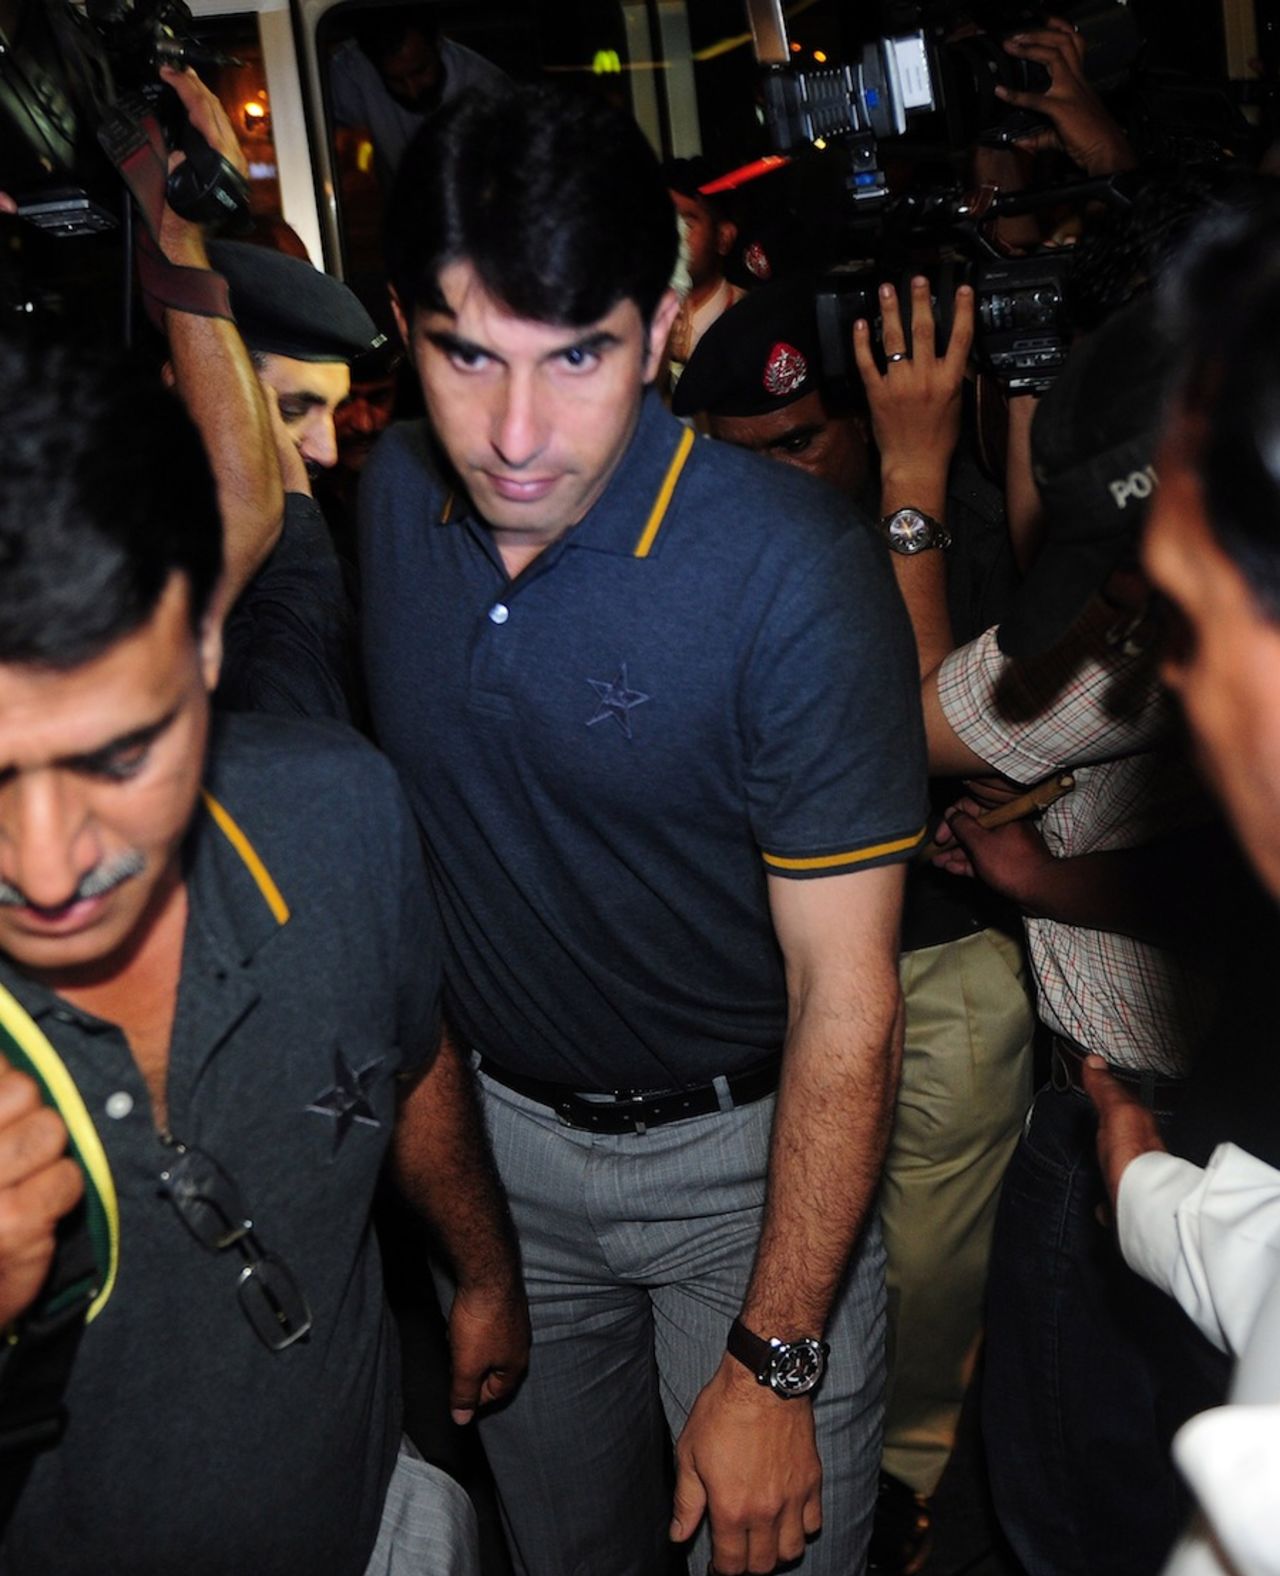 Misbah-ul-Haq at the airport before leaving for West Indies, Karachi, July 7, 2013